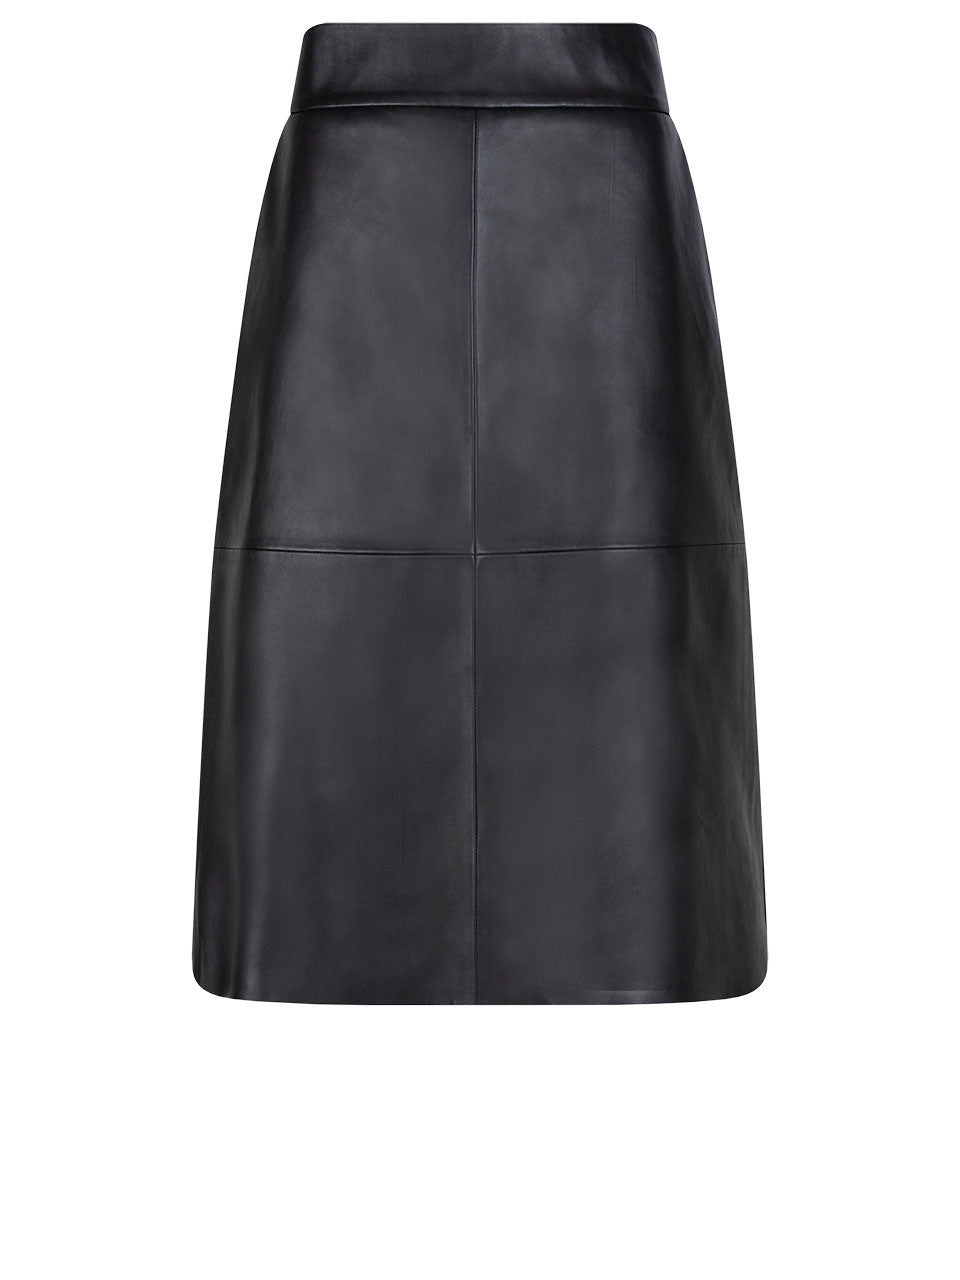 A-lines skirt made of certified lamb leather